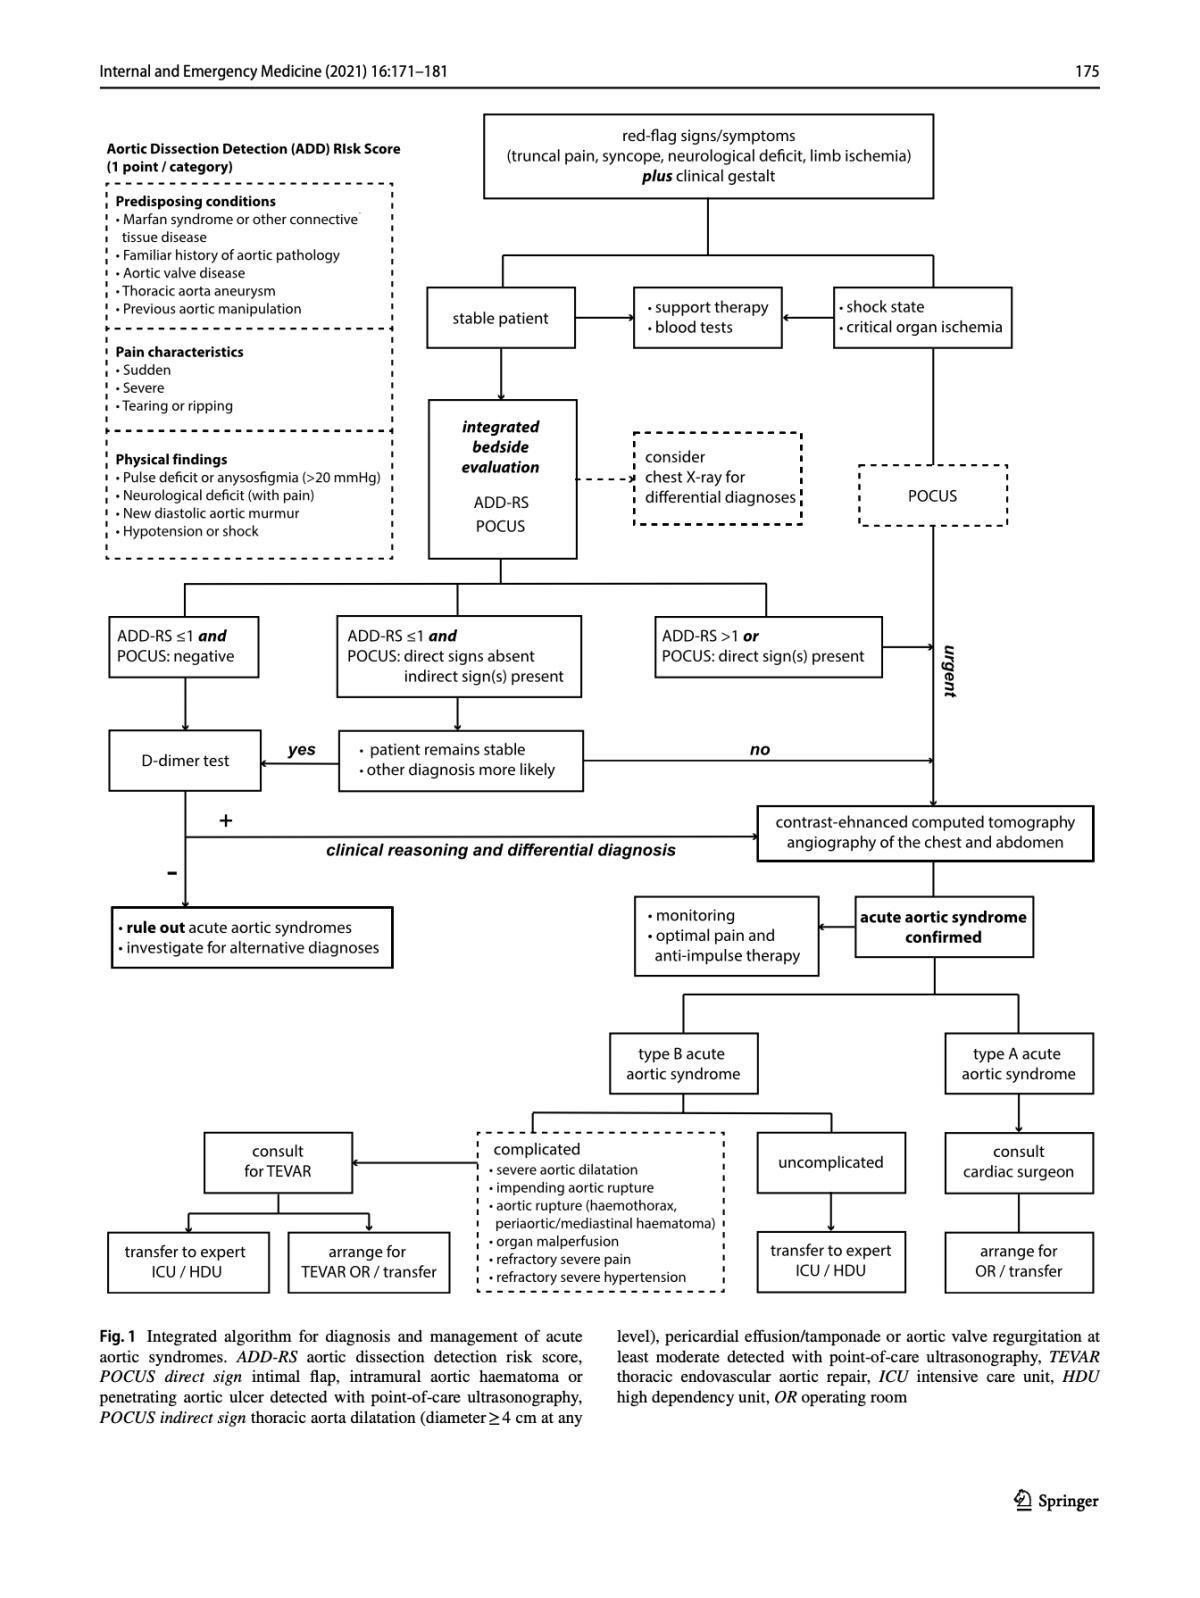 Diagnosis and management of acute aortic syndromes in the emergency department